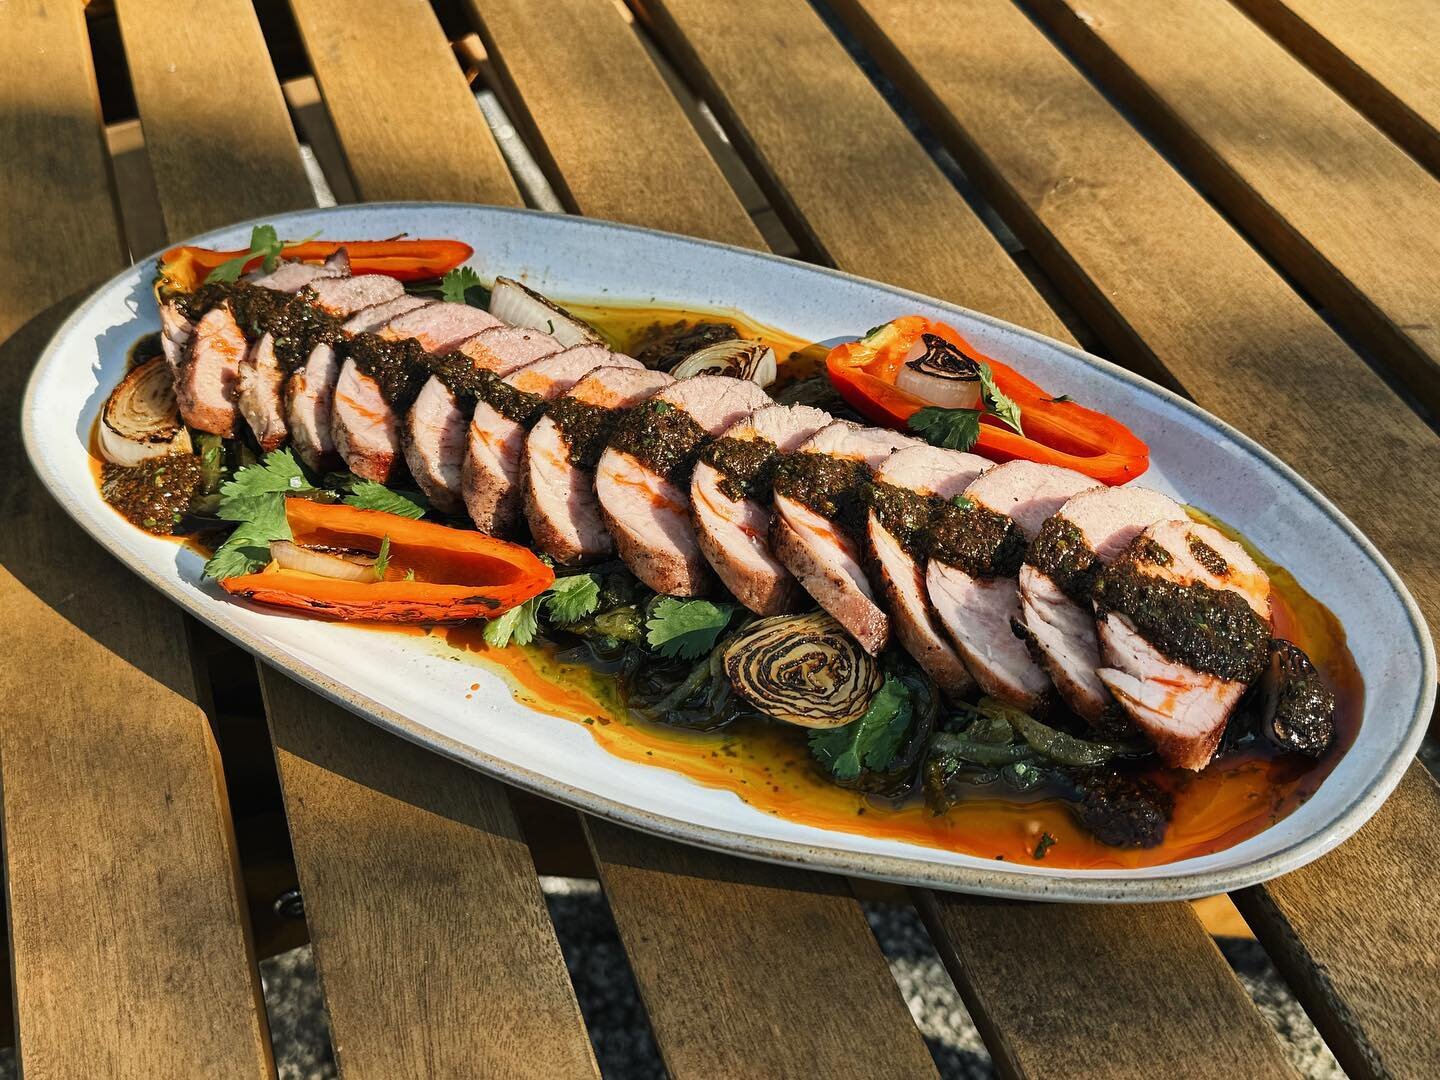 New to our Protein Board Spring Menu- GRILLED PORK TENDERLOIN with Poblano Piperade, Red Chimichurri, Grilled Peppers, and Spring Onions ✨ #homespunatl